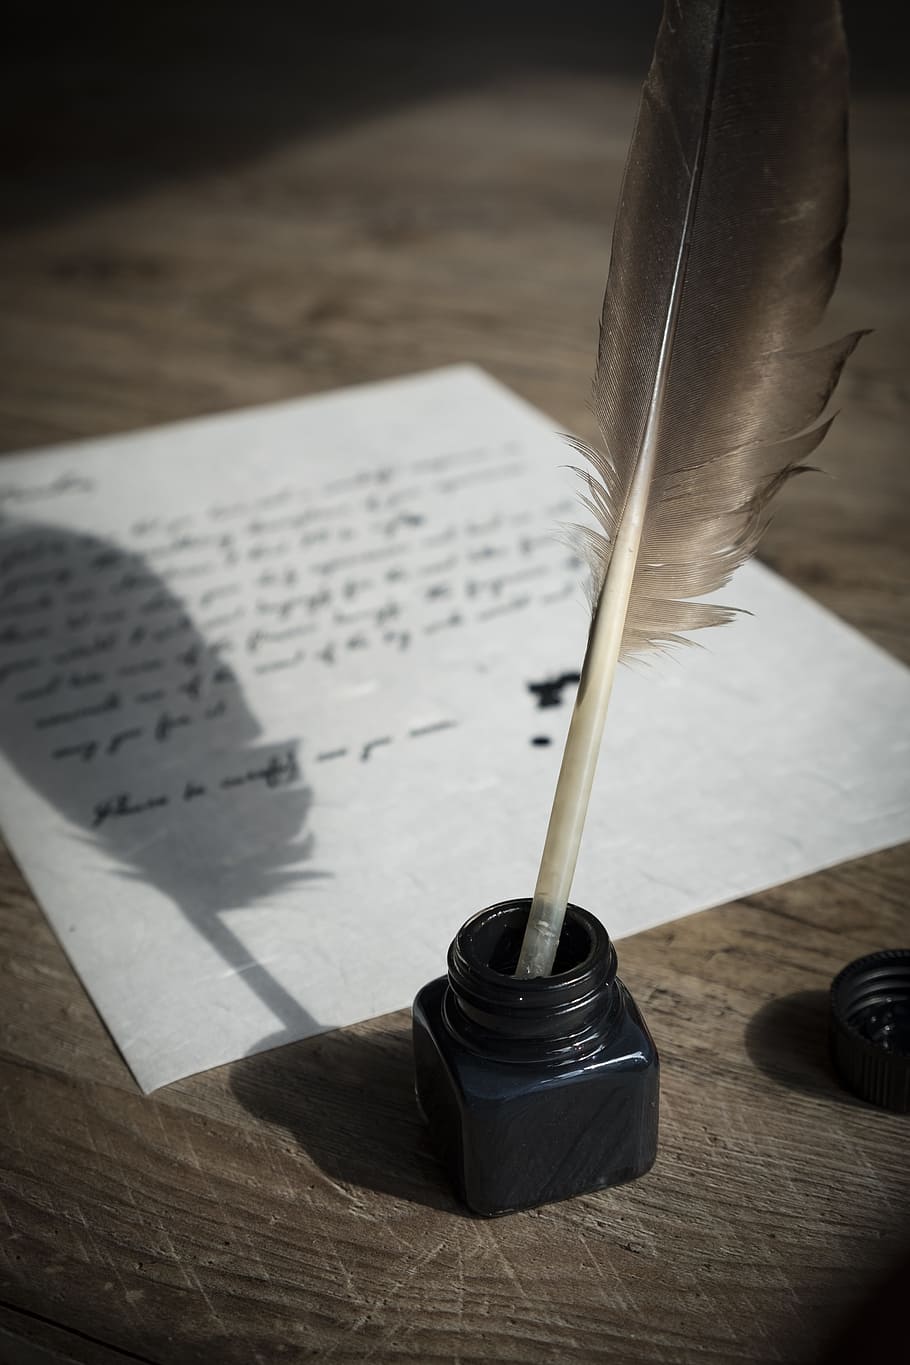 HD wallpaper: feather, ink pot, writing, table, wood - material ...